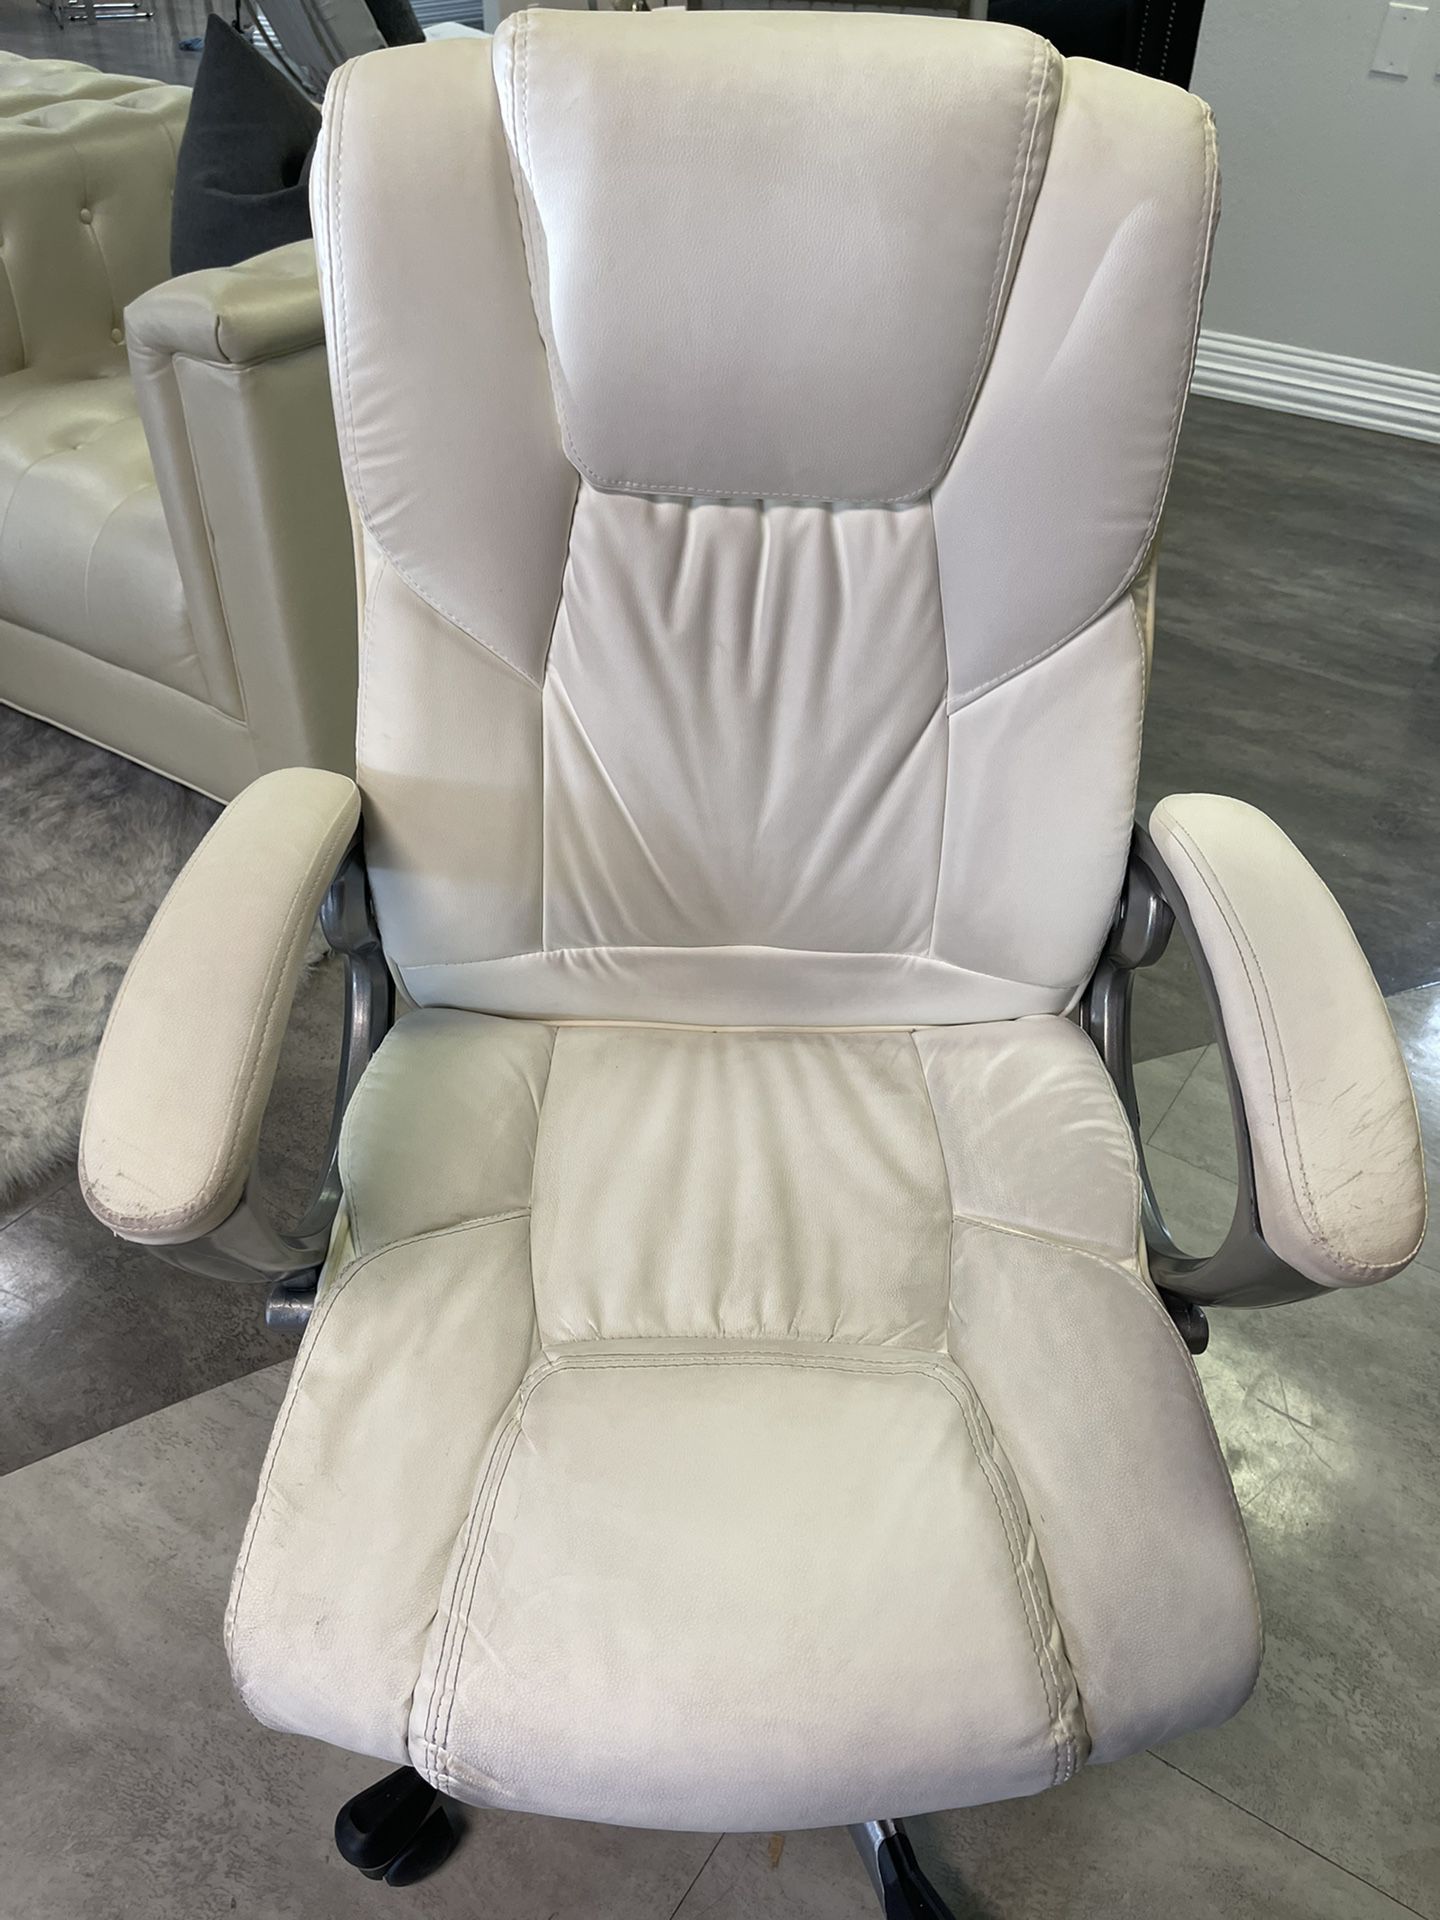 White Office Chair From Home Stager Warehouse (2 In Stock)